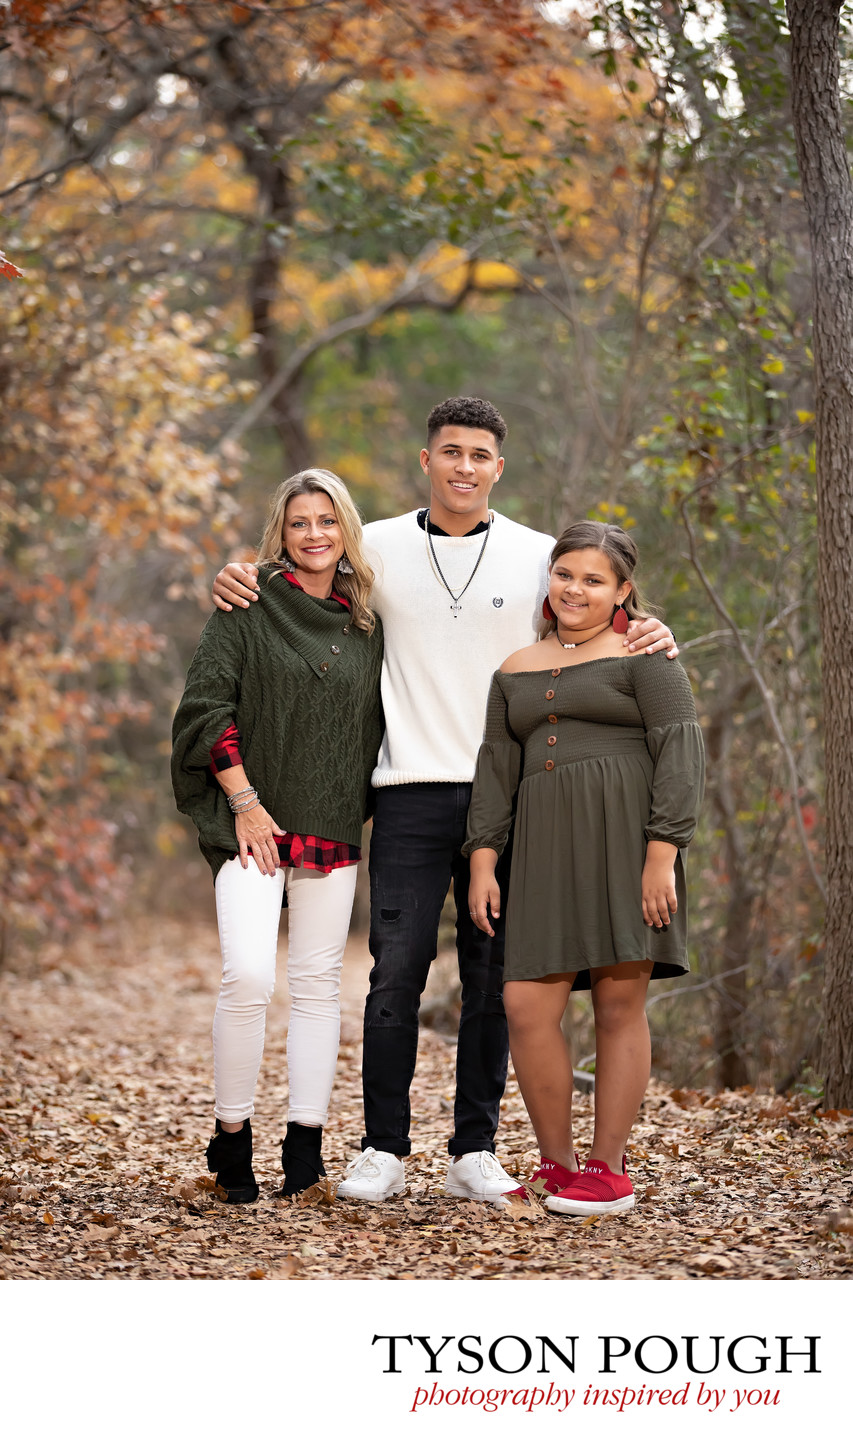 Family Holiday Portraits in the Park